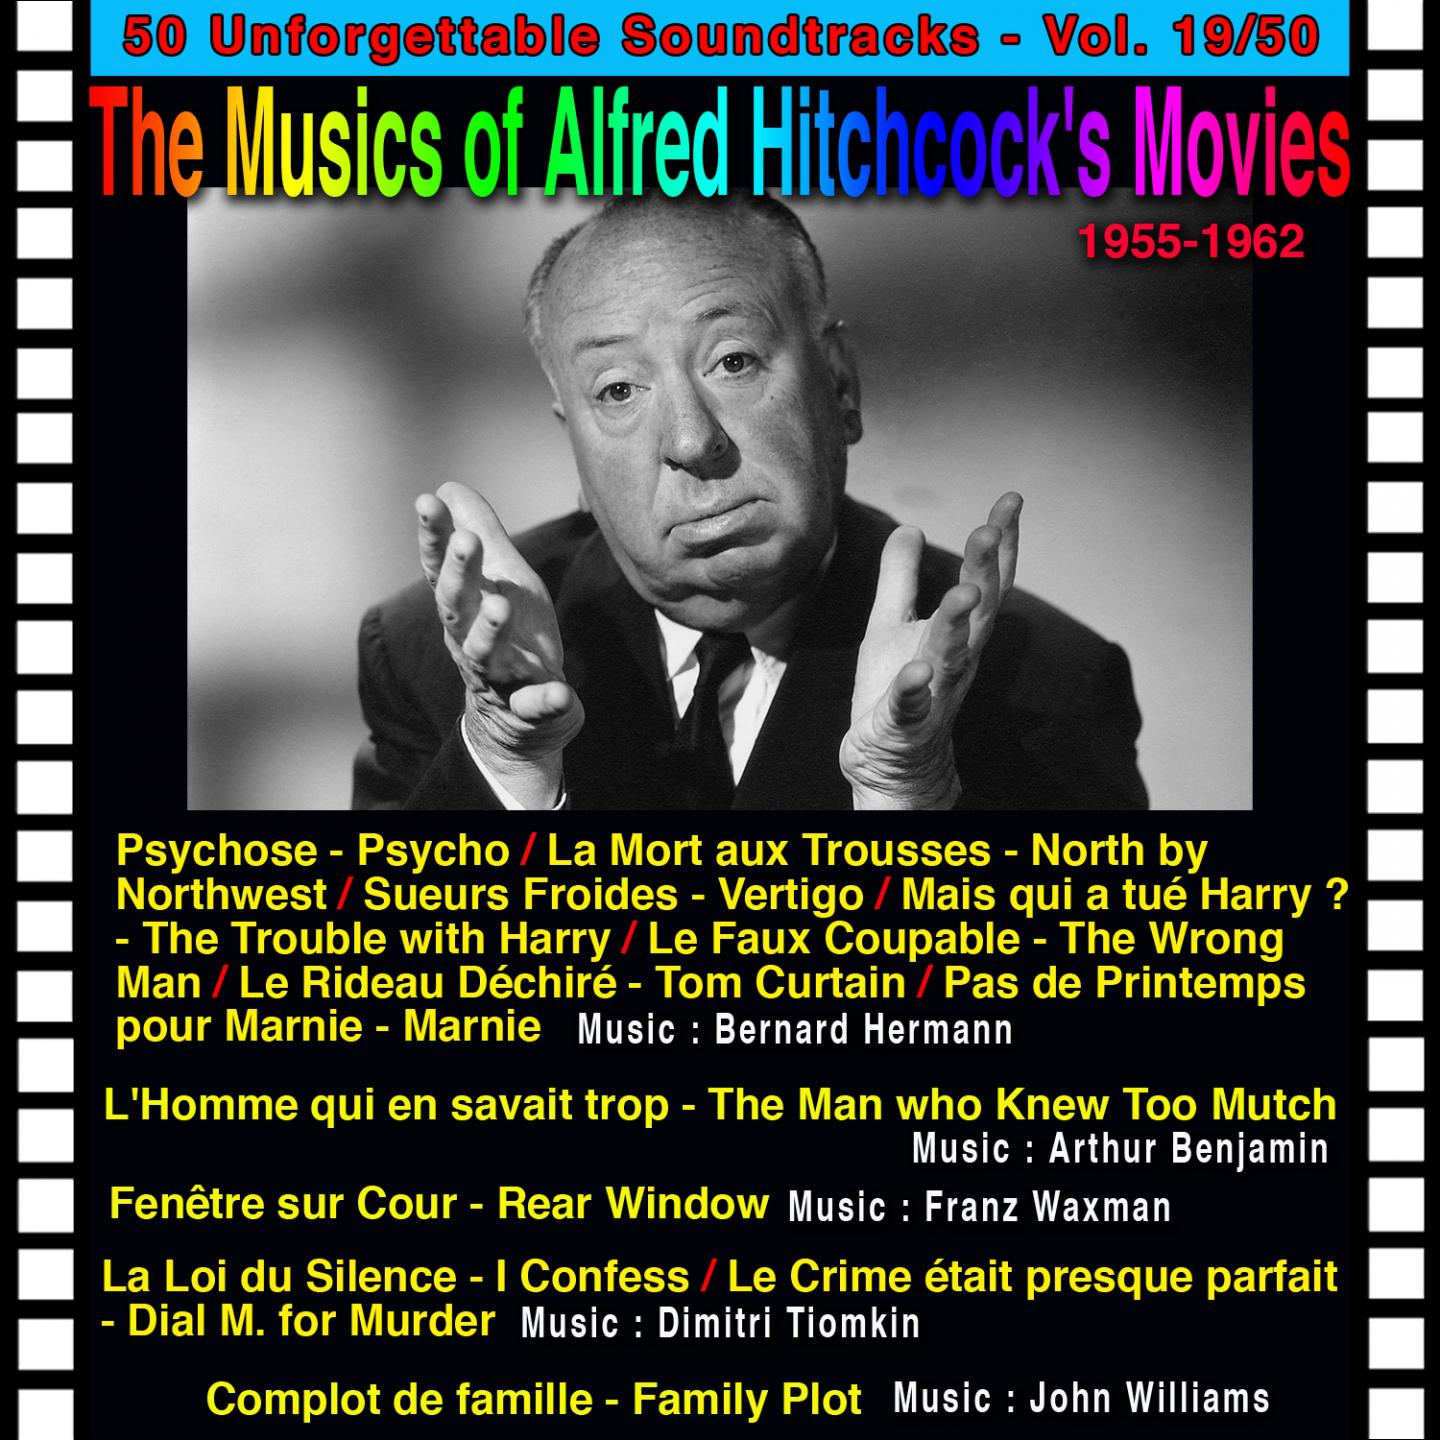 L'homme Qui En Savait Trop / The Man Who Knew Too Much: The Storm Clouds (Alfred Hitchcock (1955-1962))